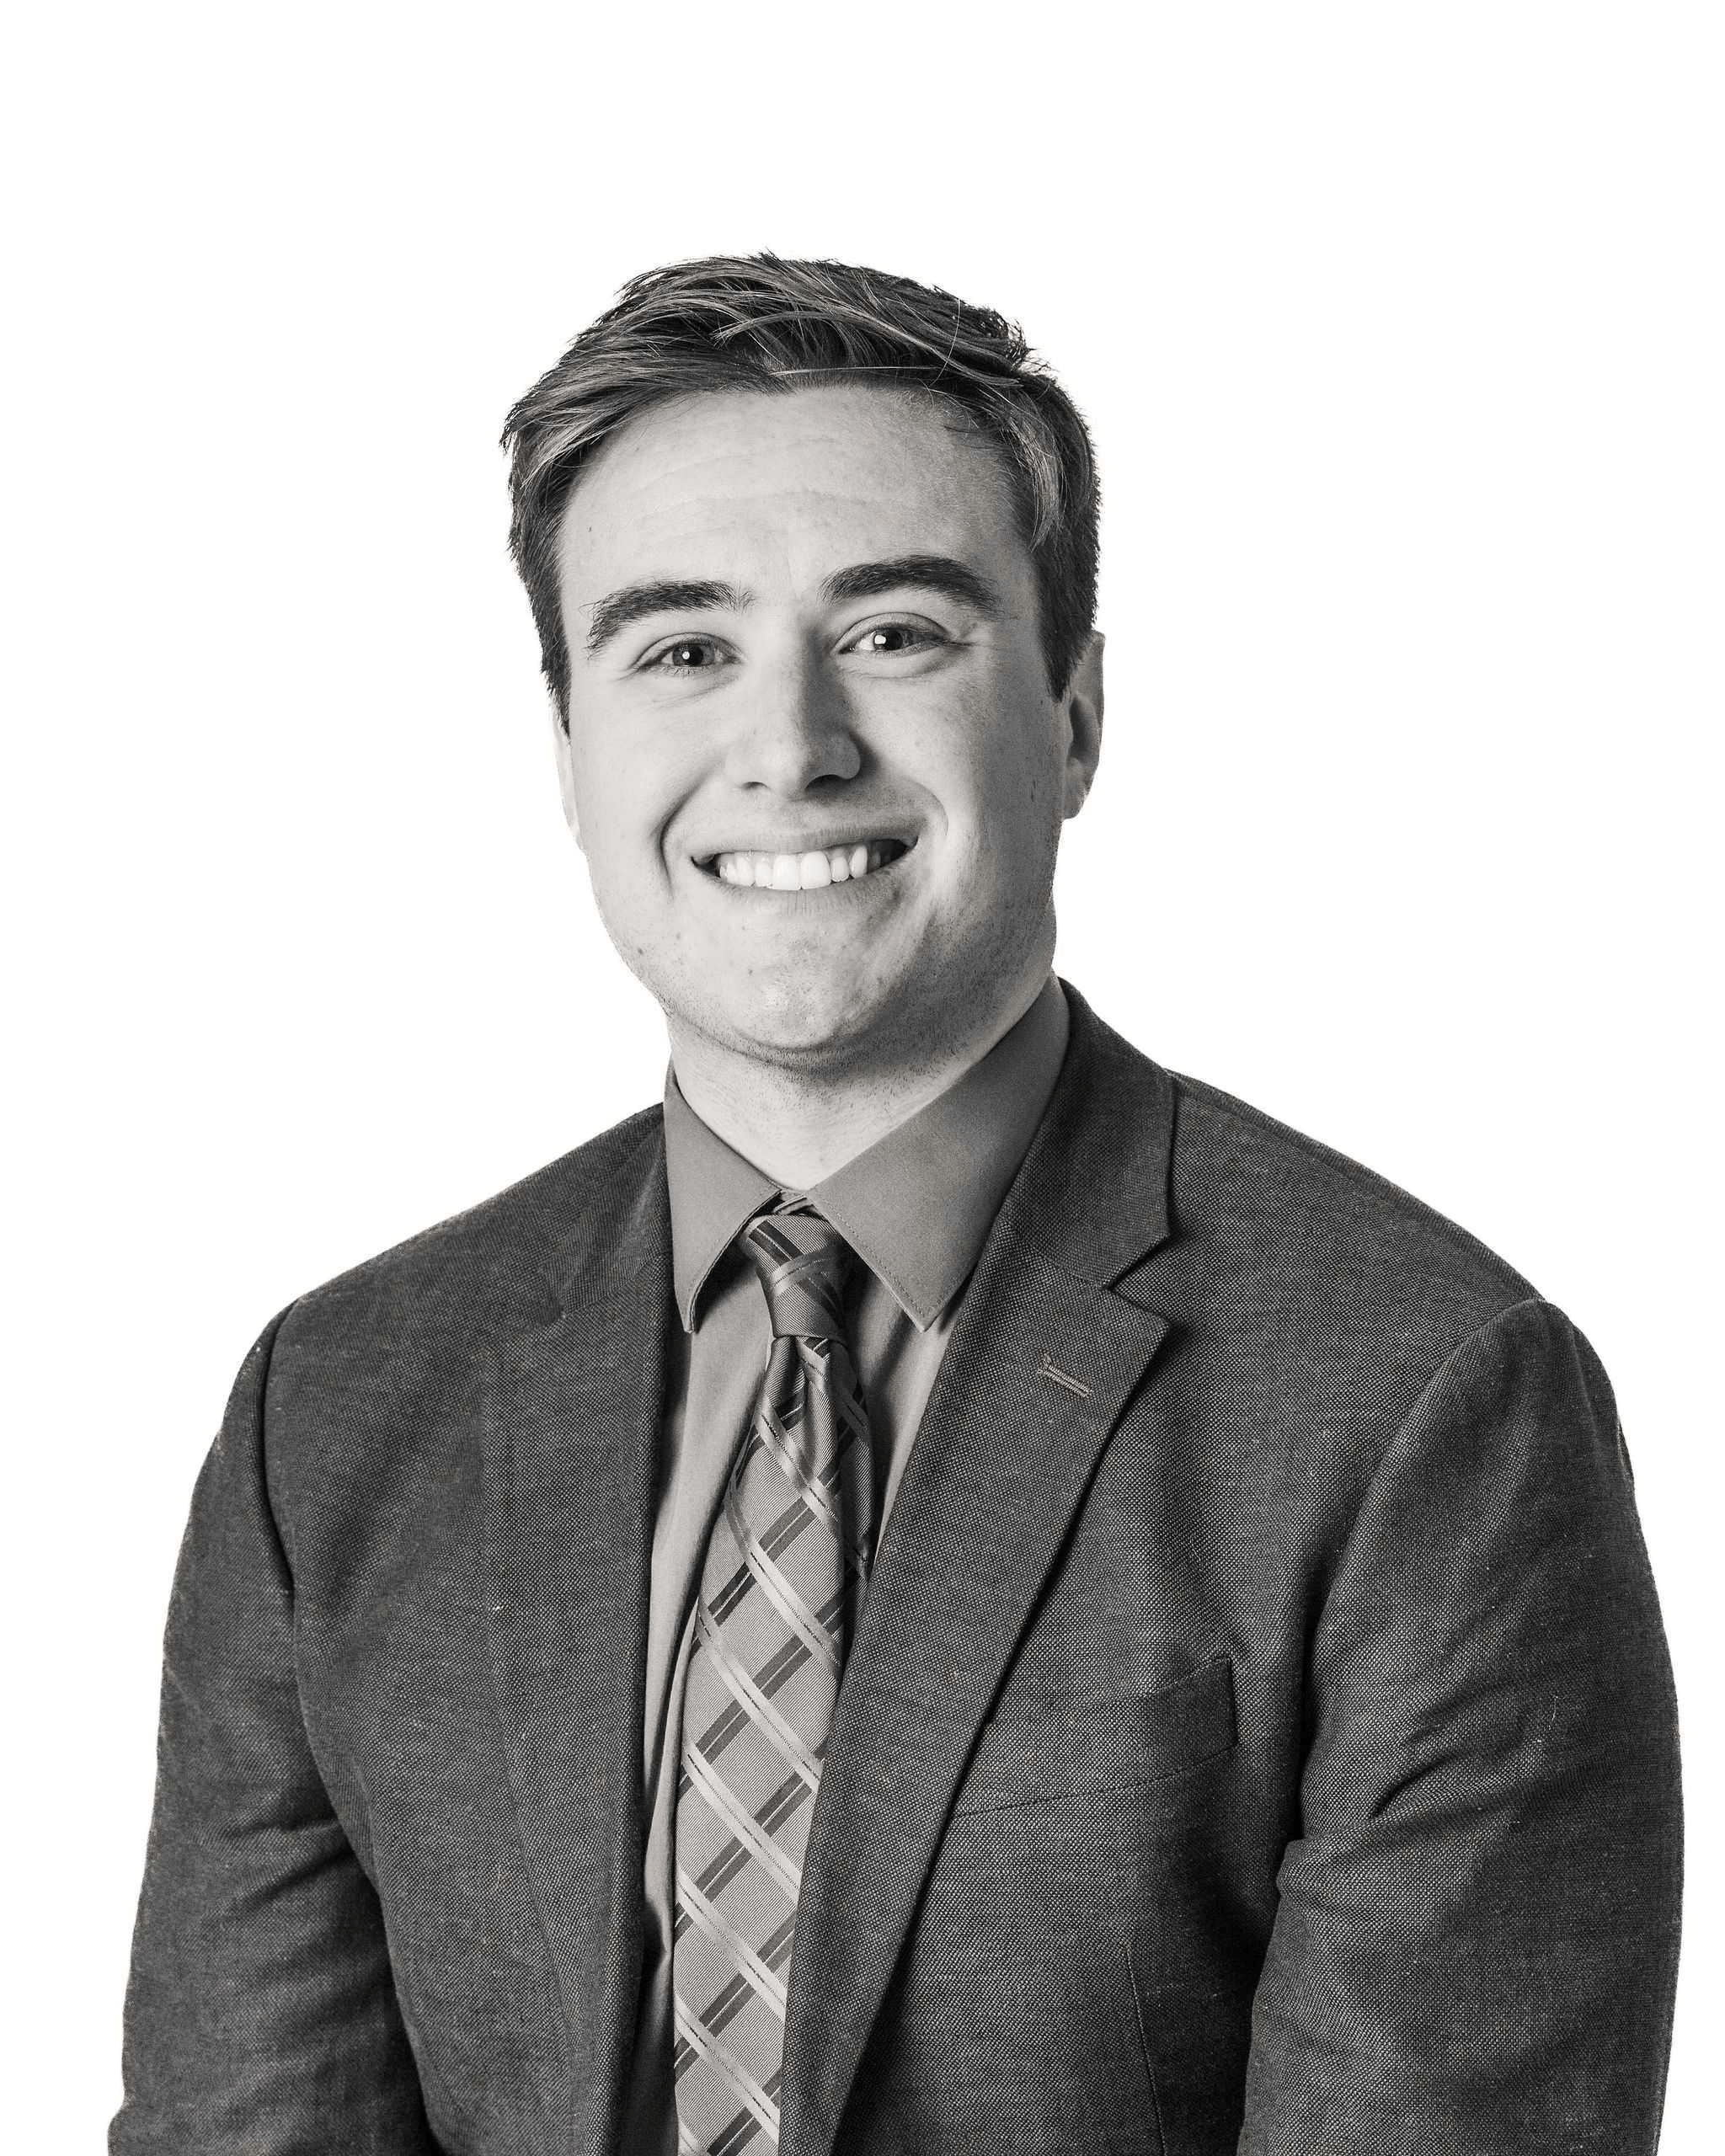 Jeffrey Rowe is a Revenue and Data Analyst at Valor